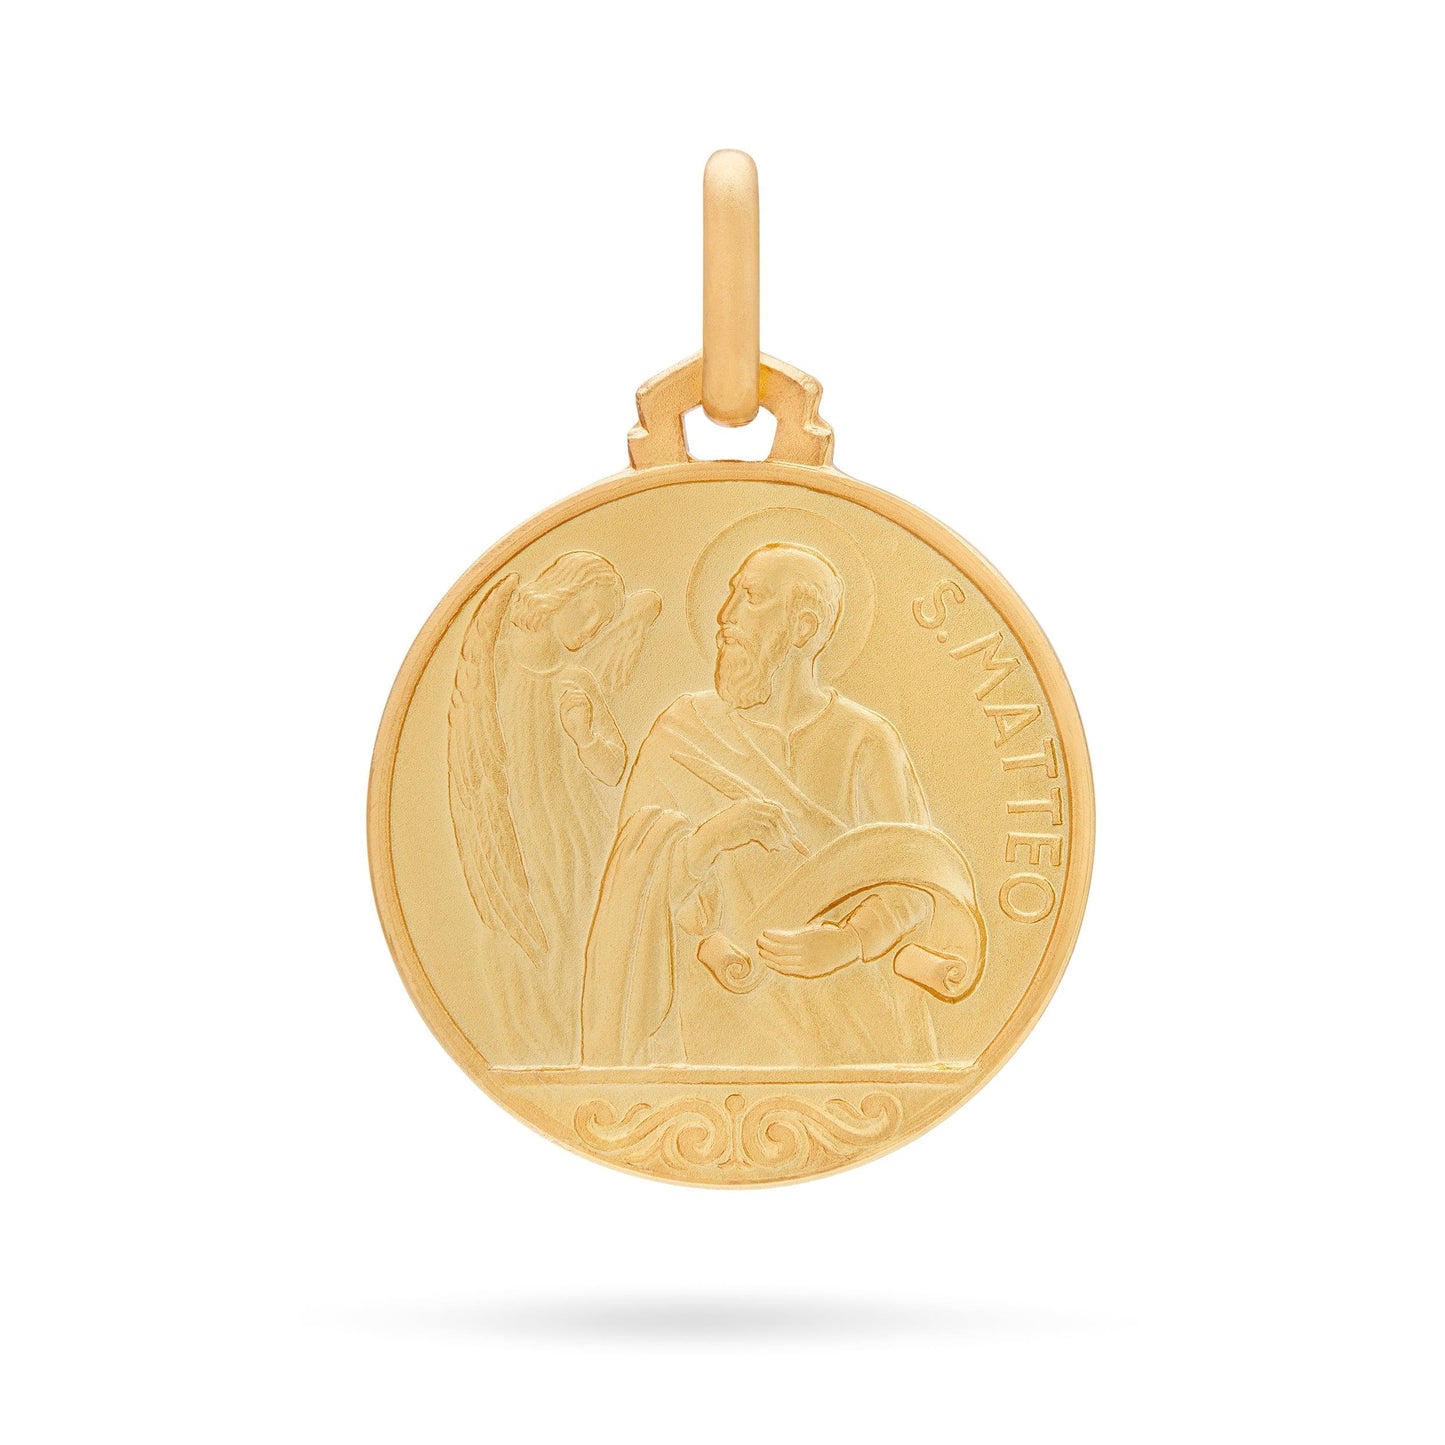 MONDO CATTOLICO 18 mm (0.70 in) Gold medal of Saint Matthew